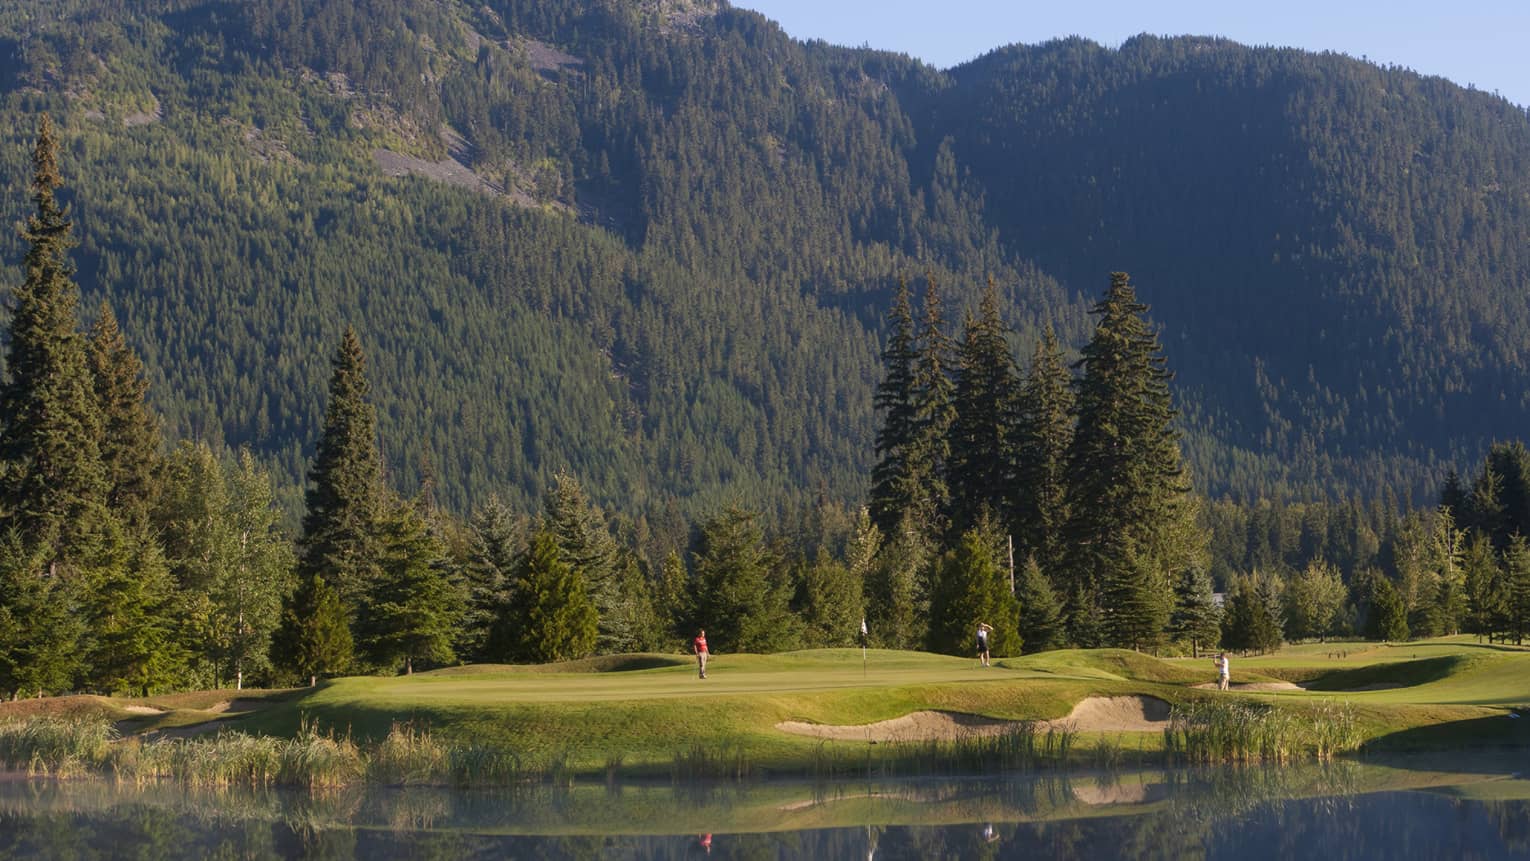 Distant golfers on a green, a pond in front, evergreens behind, dwarfed by a treed mountain filling most of the frame beyond.